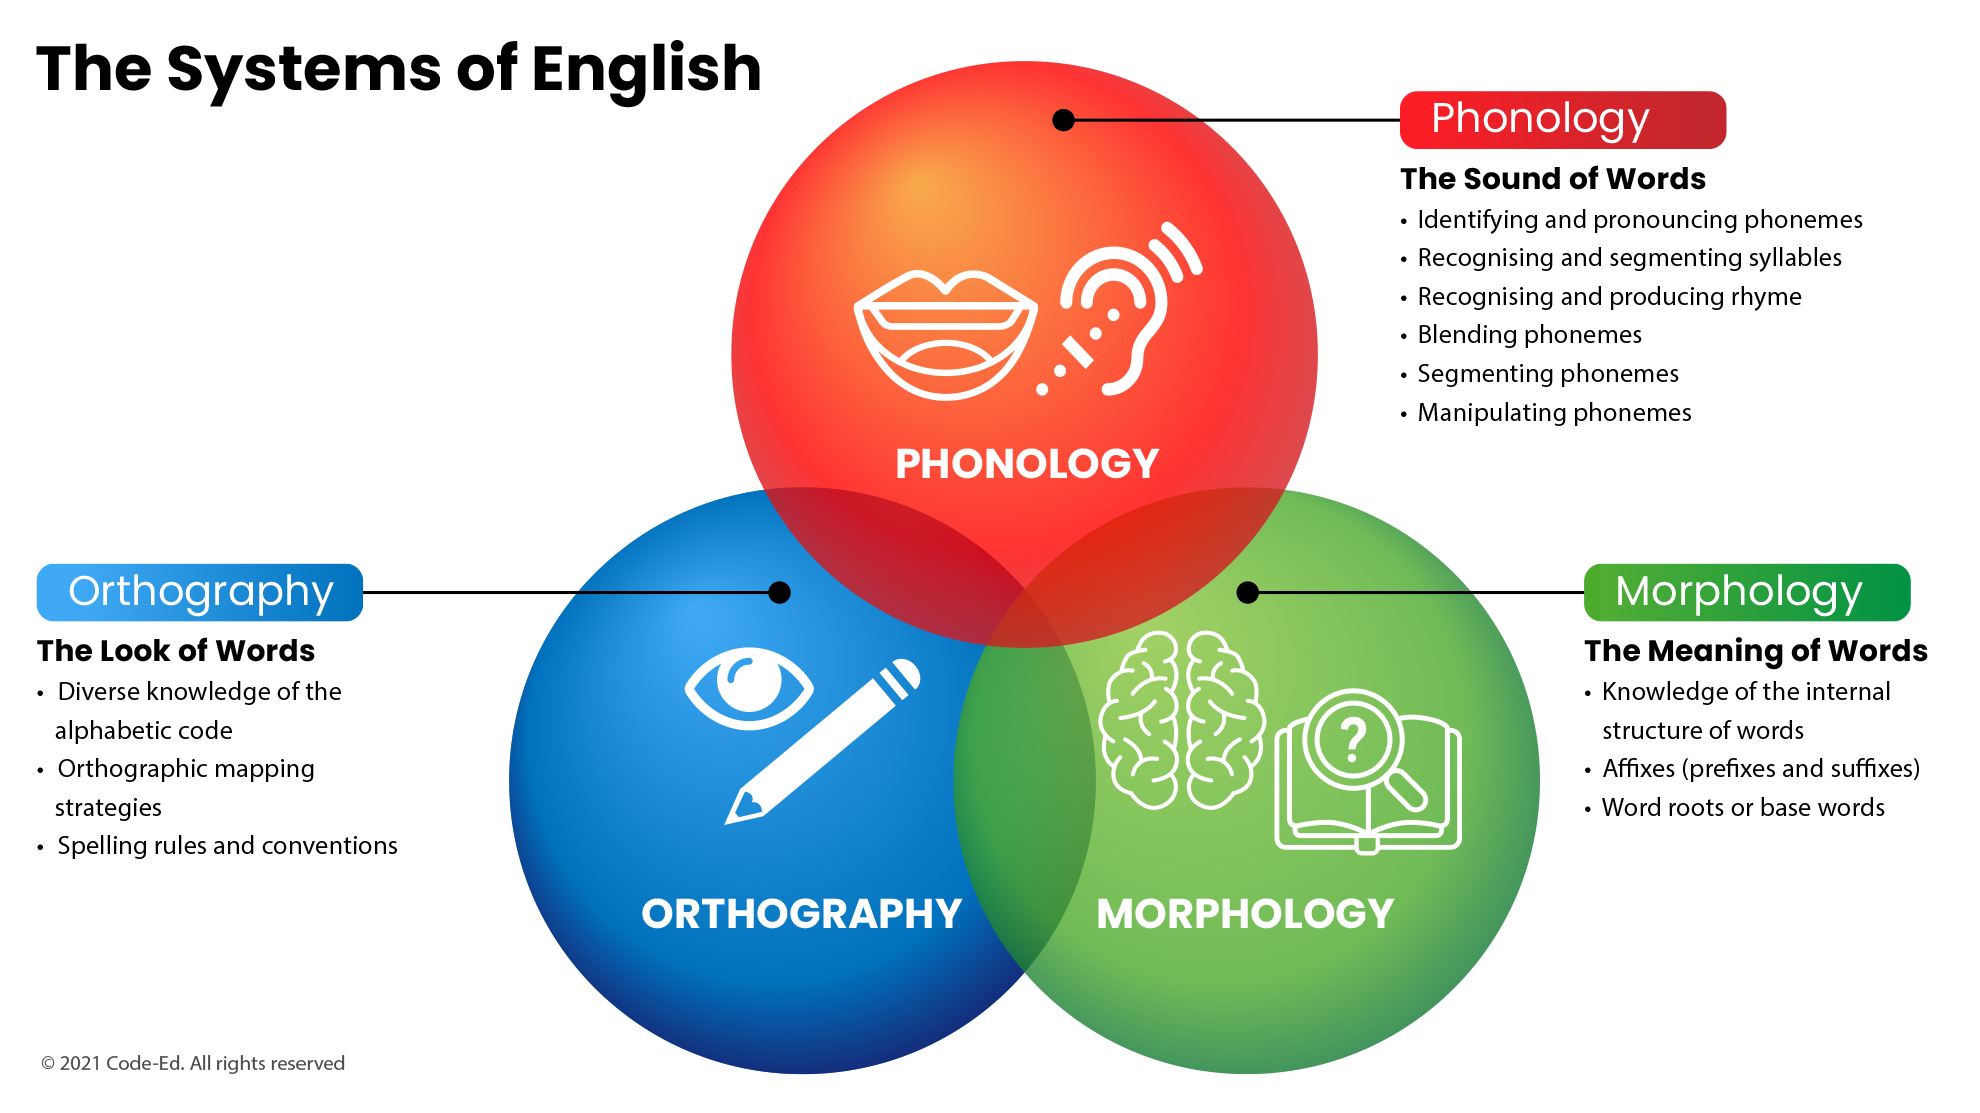 The Systems of English